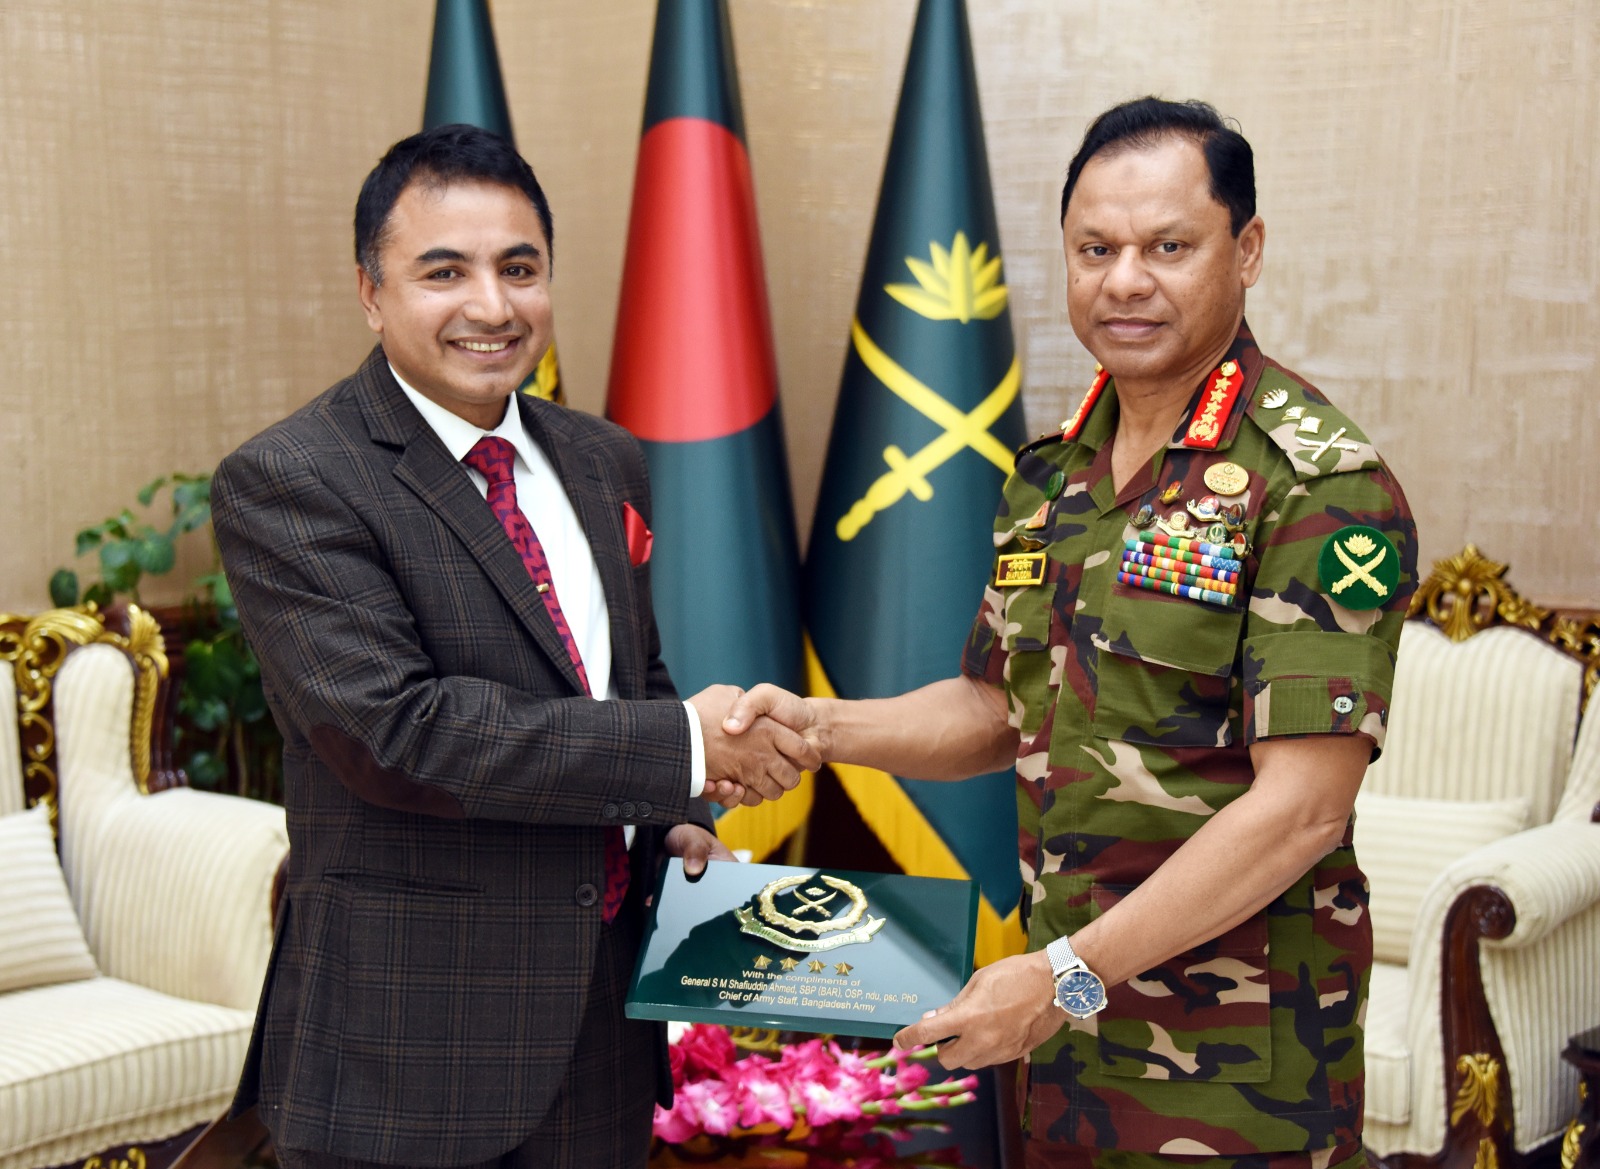 Mr. Md. Golam Rahman, Director General of Mission Audit Directorate, Dhaka, paid an official visit with General S M Shafiuddin Ahmed, SBP(BAR), OSP,ndu, psc, PhD, Hon’ble Chief of Army Staff